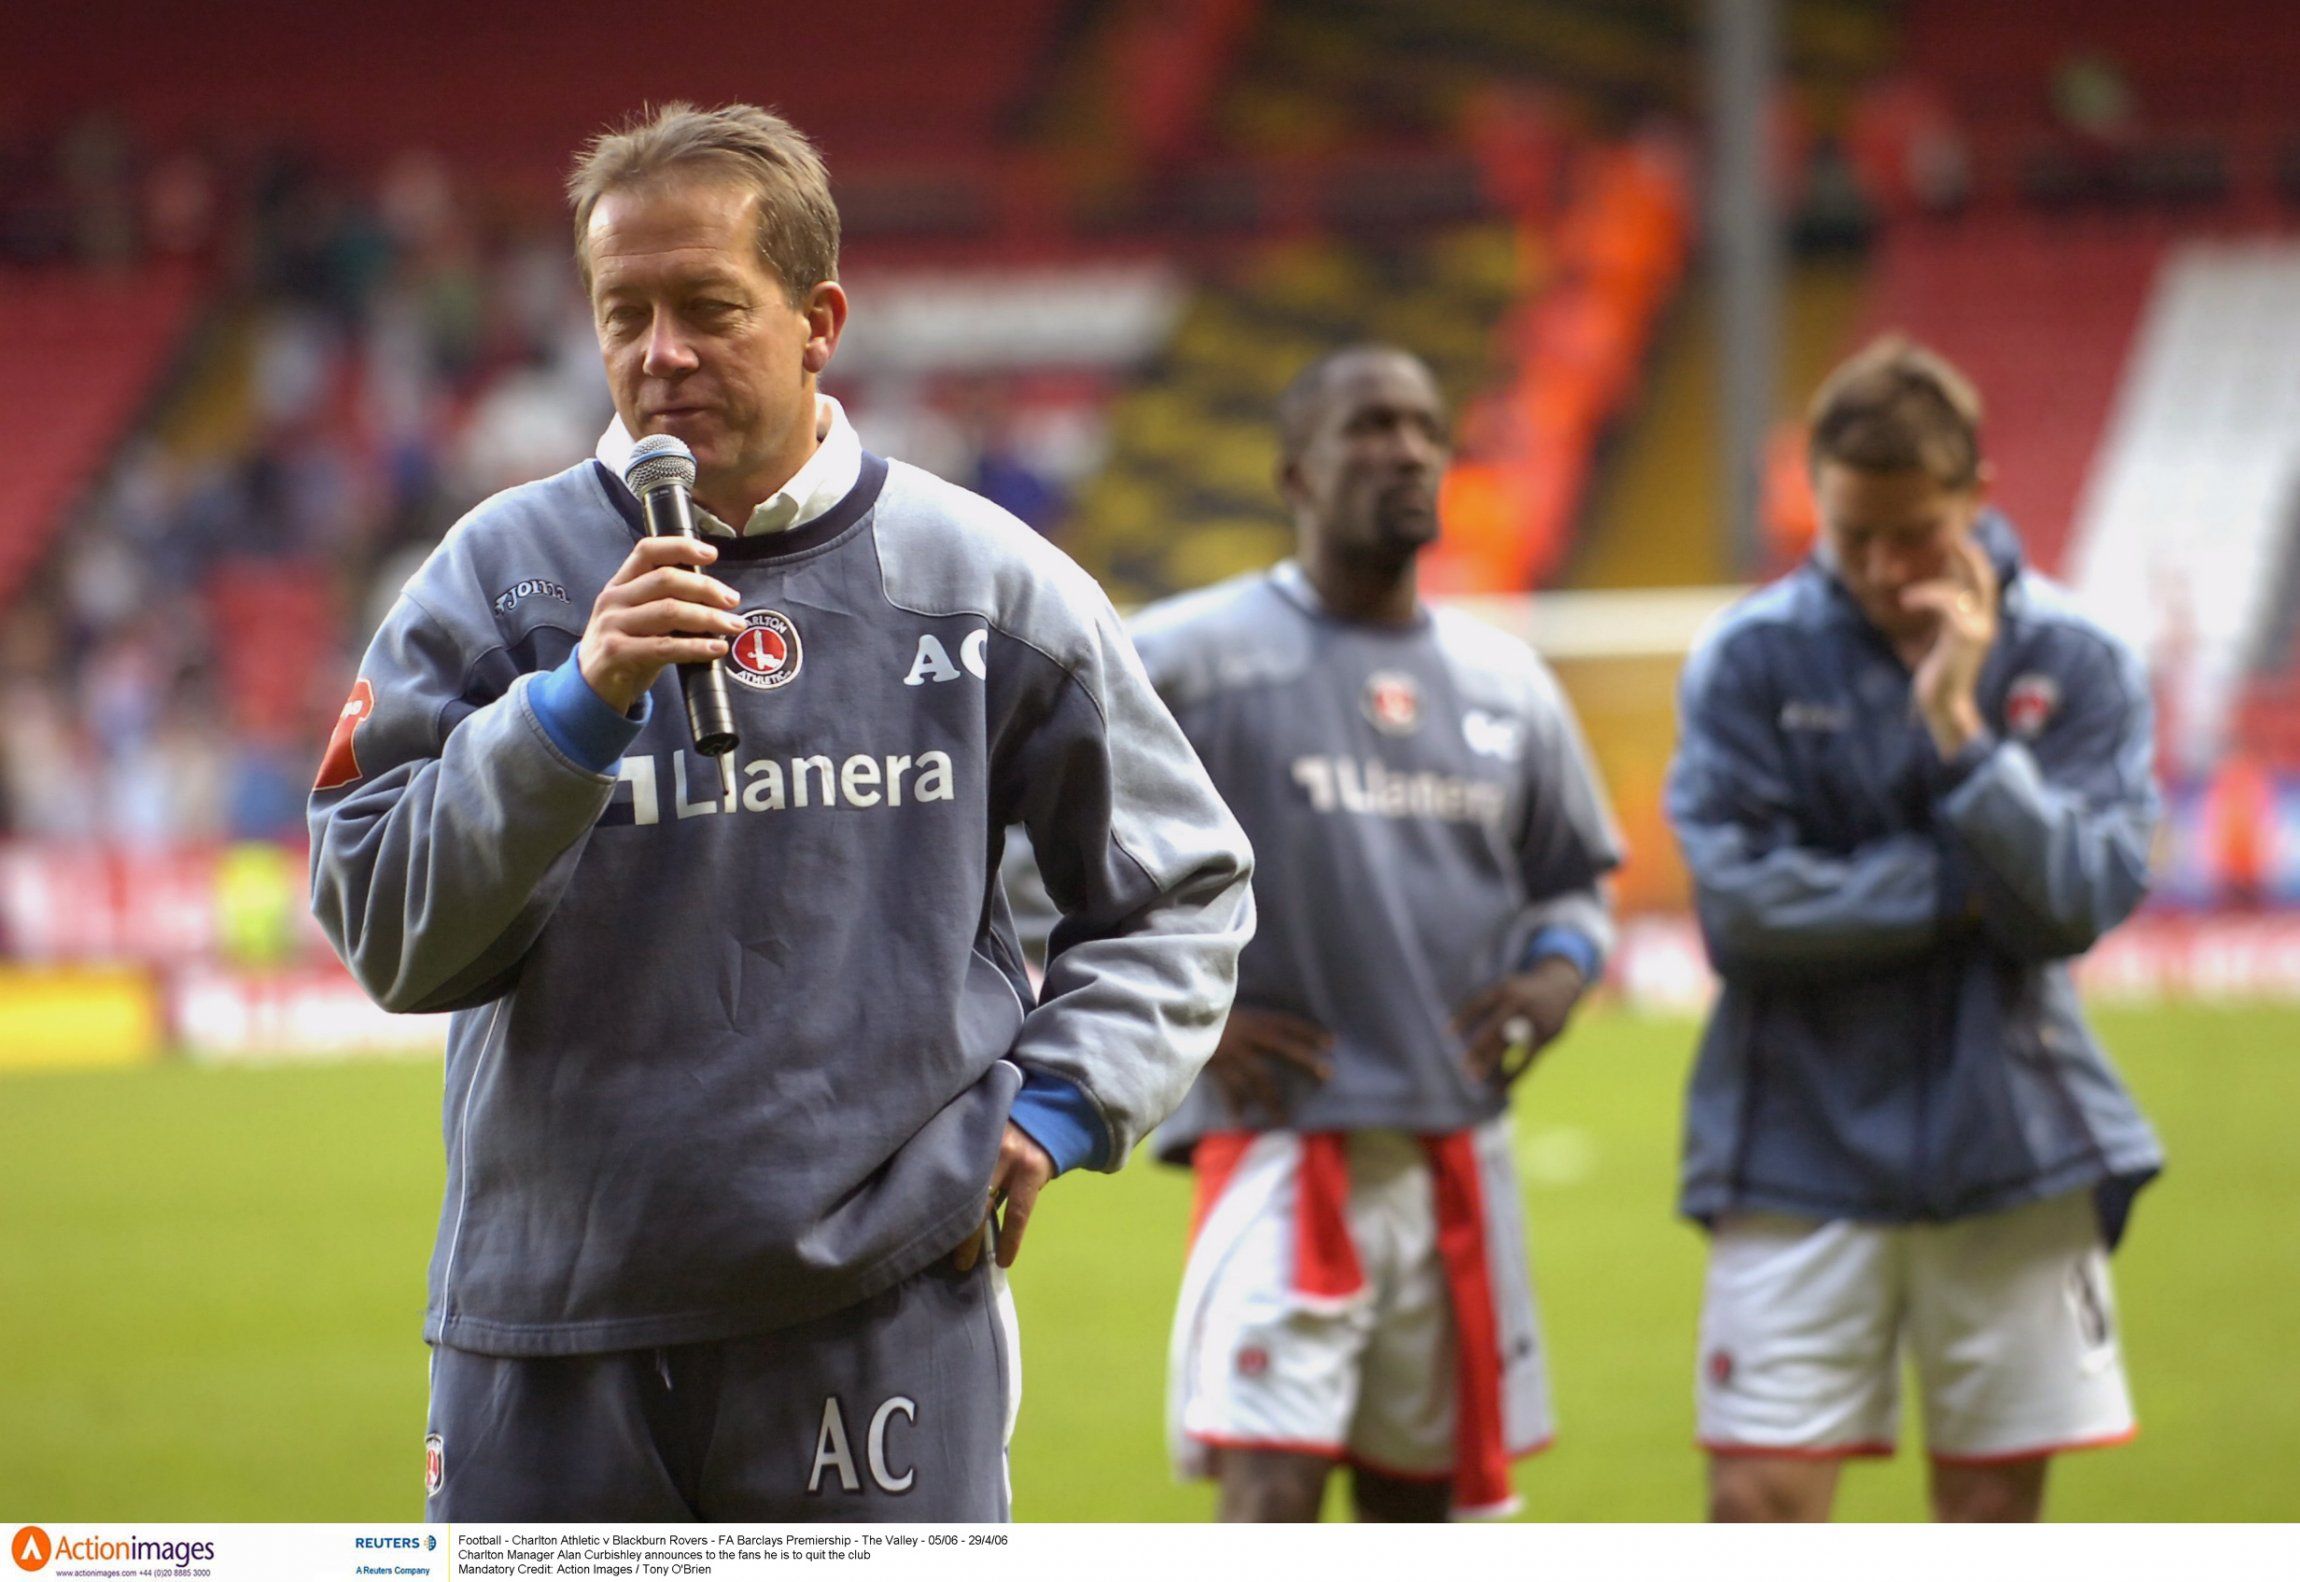 Alan Curbishley gives his farewell speech at The Valley